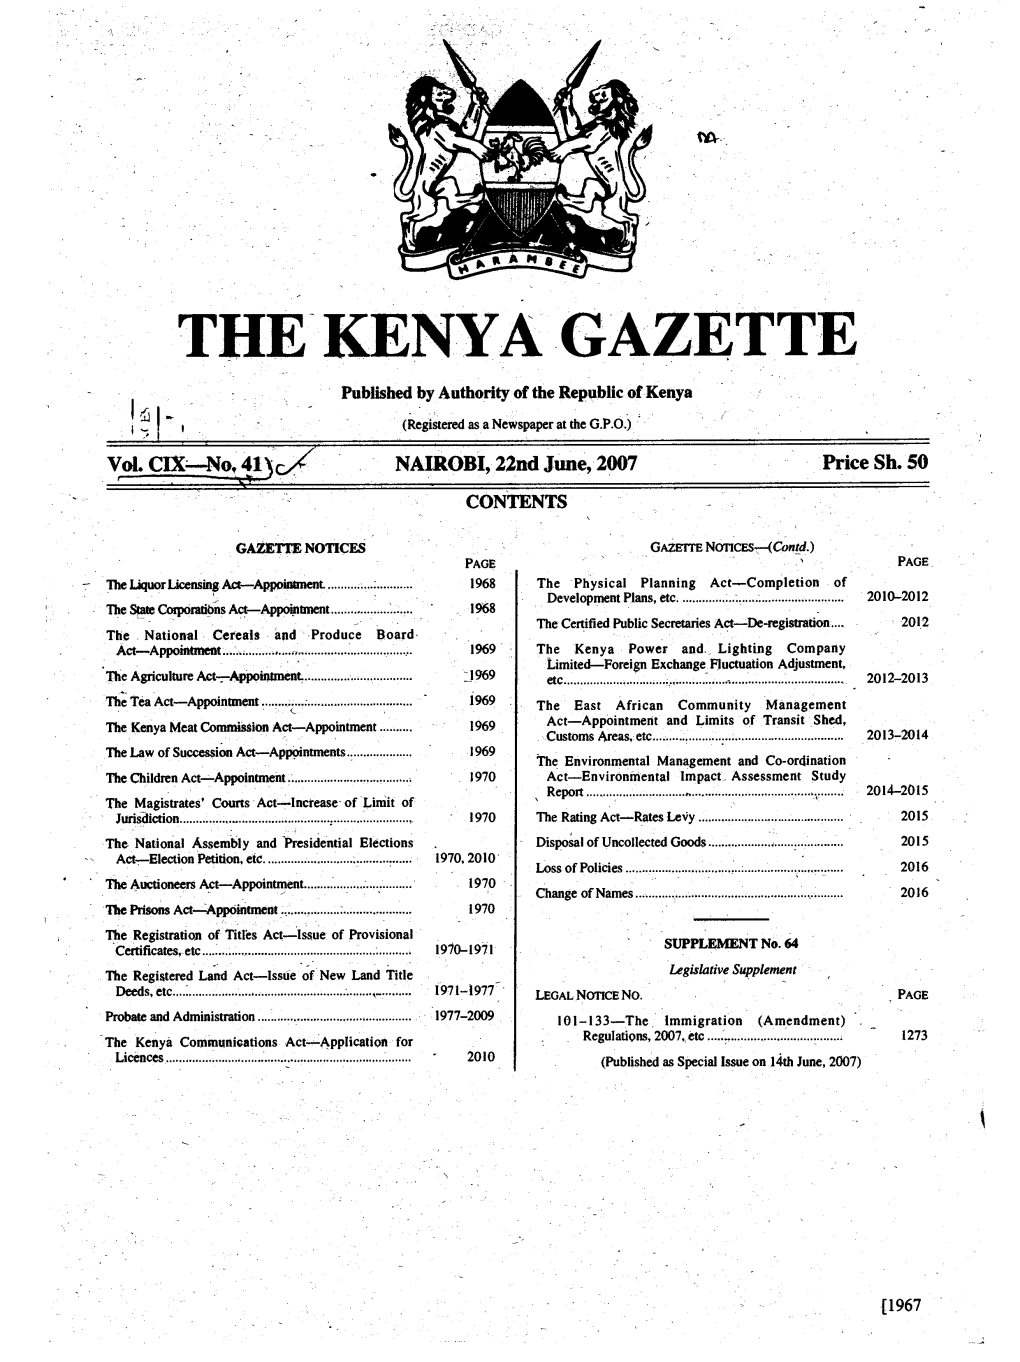 THE KENYA GAZETTE Published by Authority of the Republic of Kenya (Registered As a Newspaper at the G.P.O.) Vol